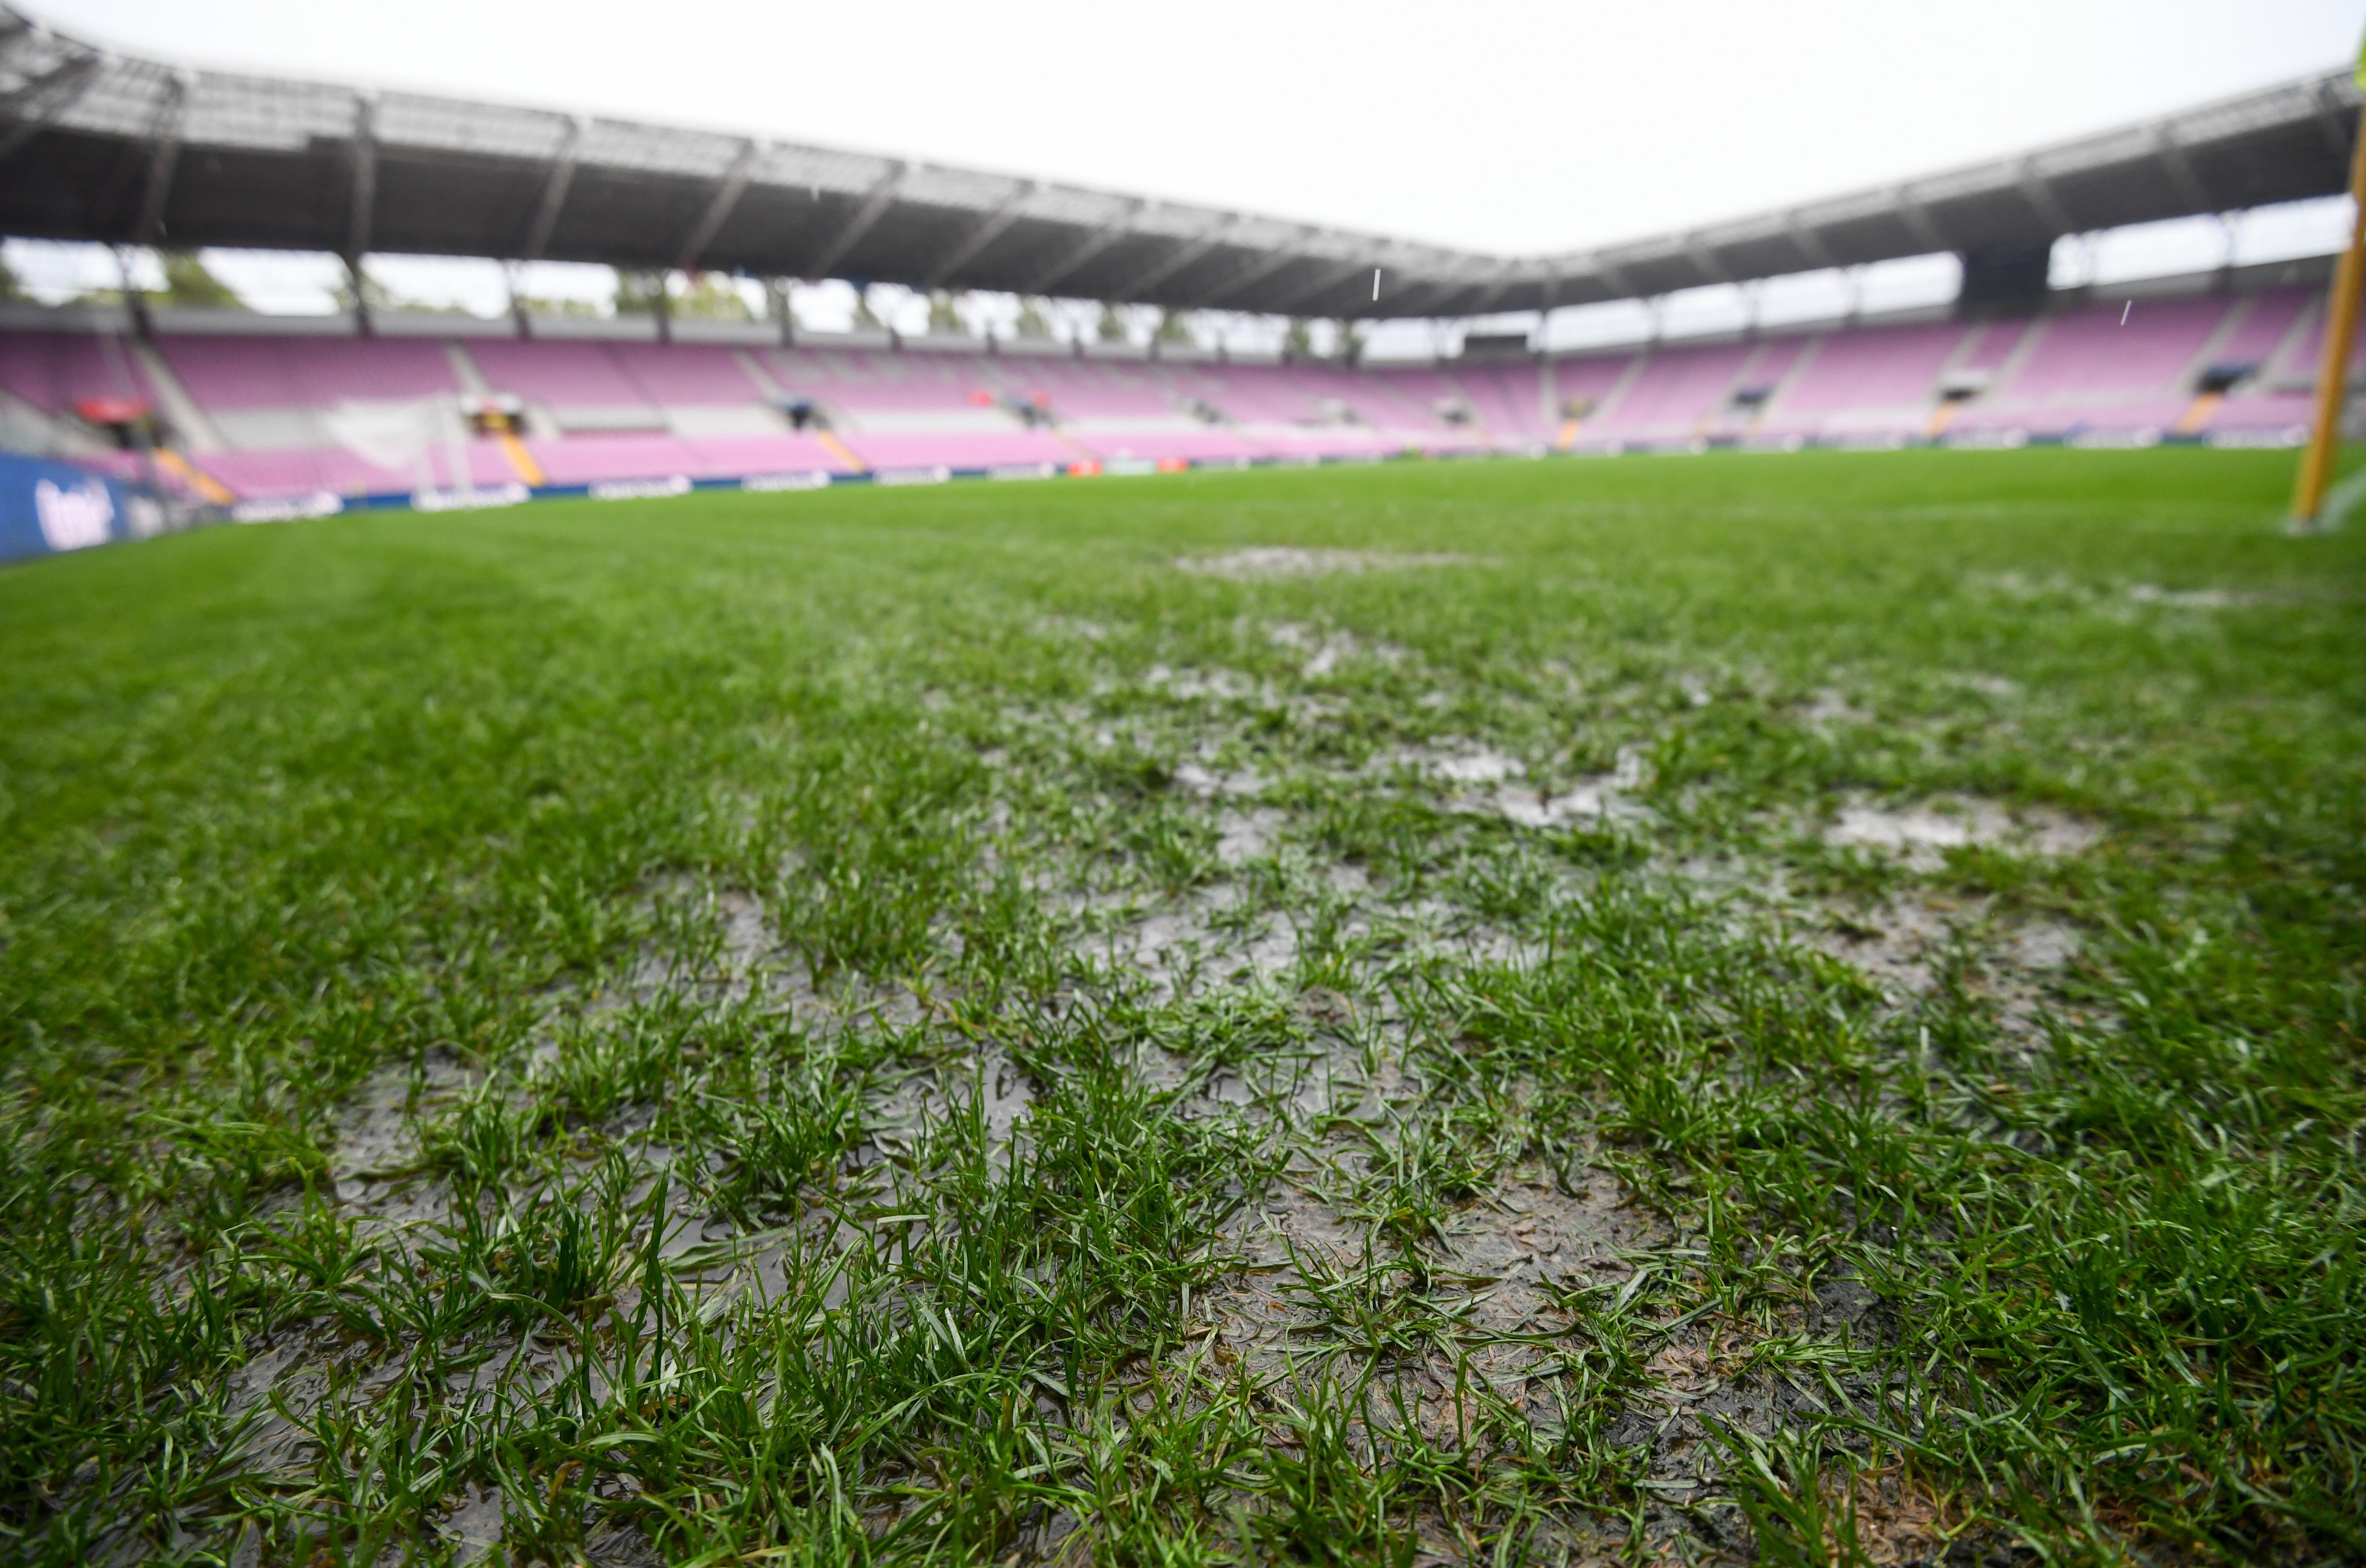 Update: Ireland's Euro 2020 qualifier to go ahead as pitch passes inspection